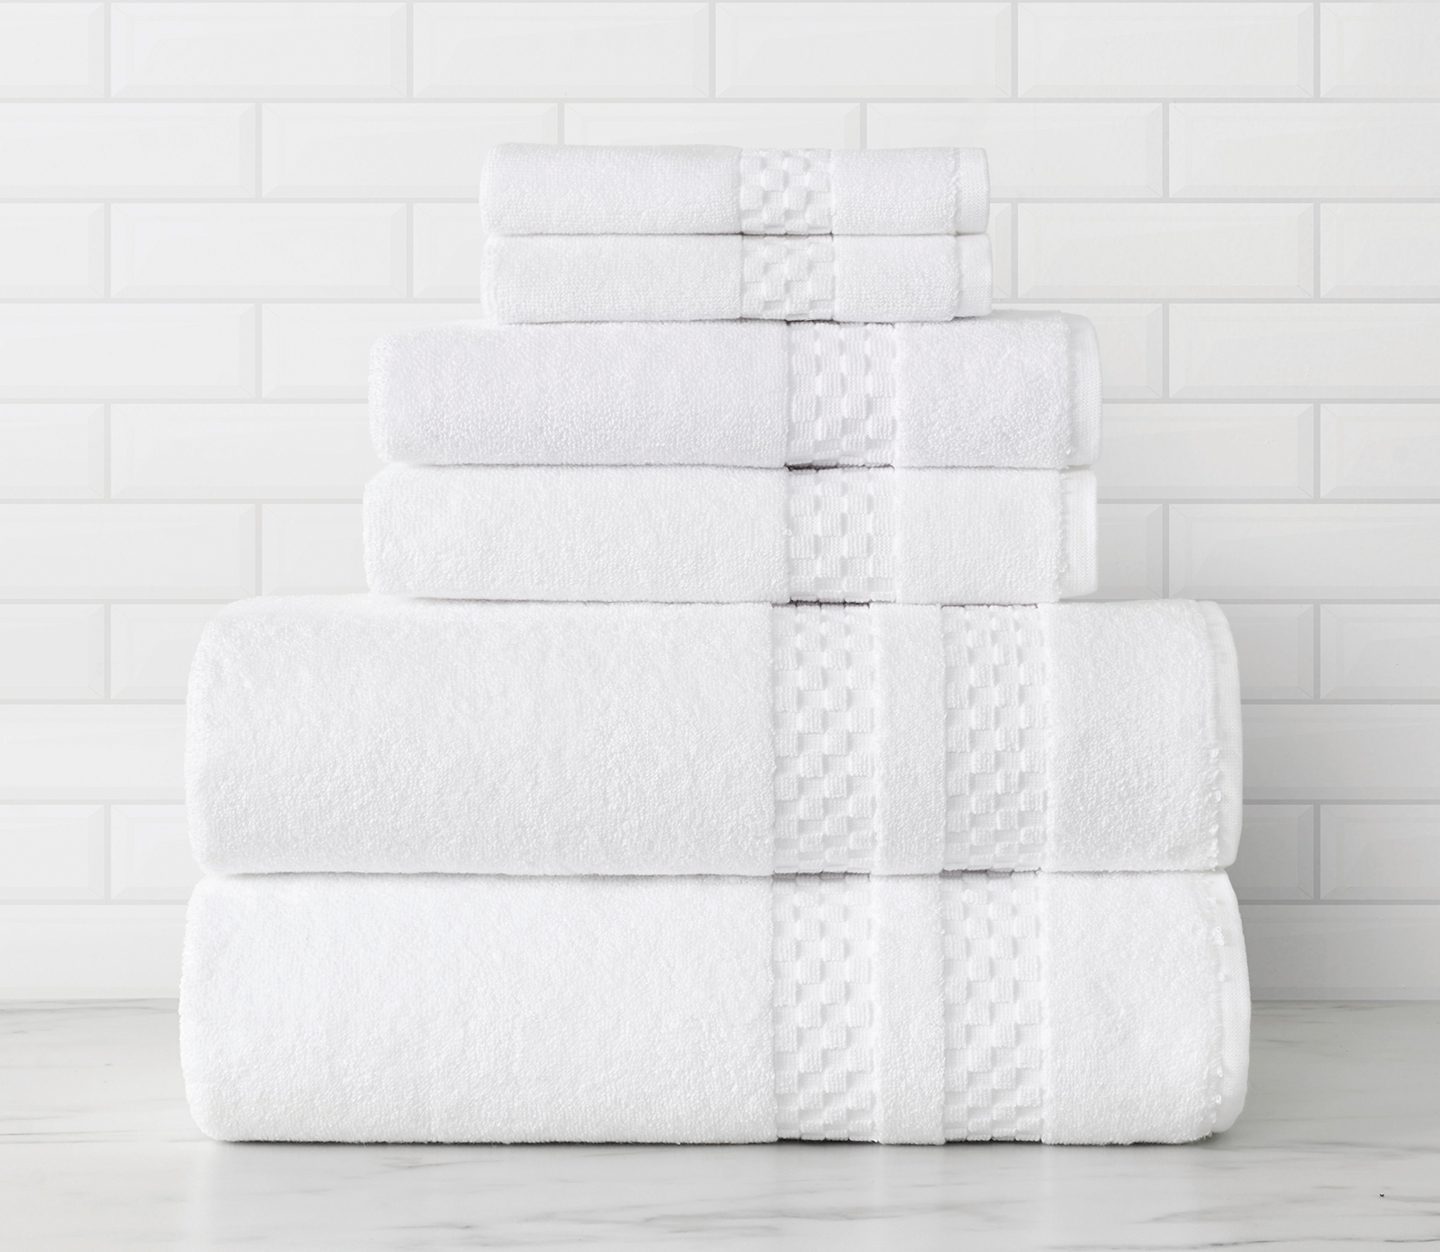 Wash Towel 13 x 13 inch White - 46964100 by Standard Textile